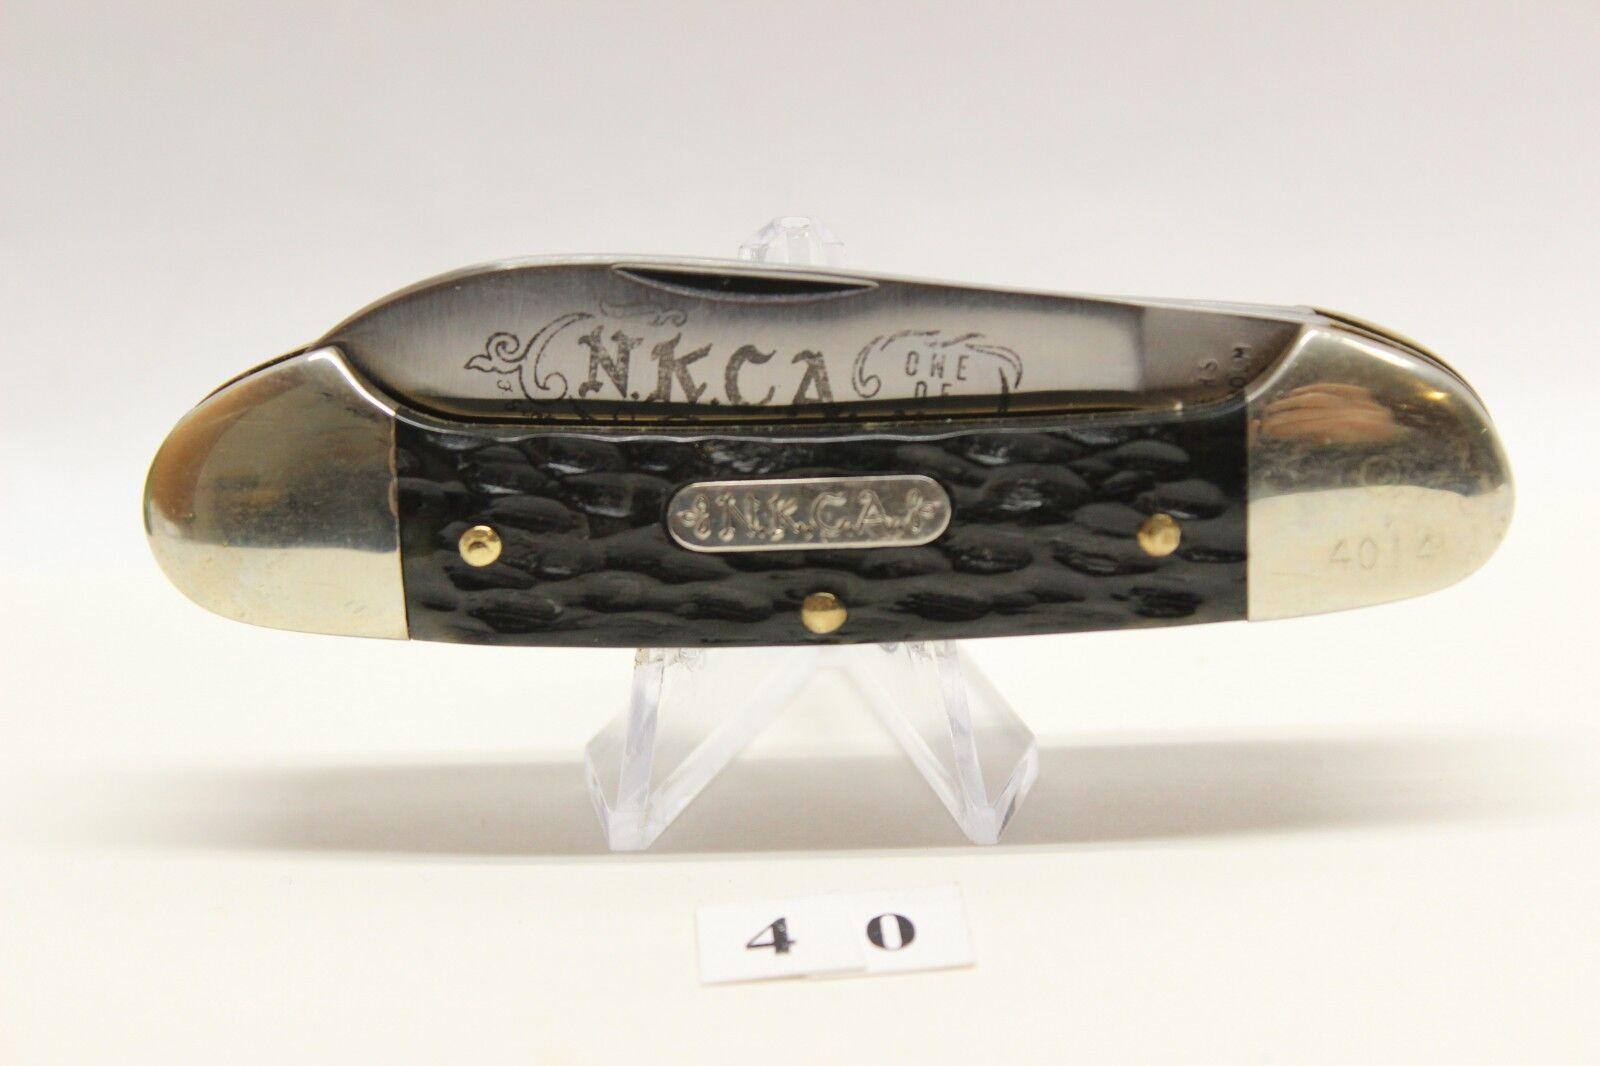 Rodgers (England) N.K.C.A. NKCA 1978 (1 of 6000) Commemorative Jack Knife 